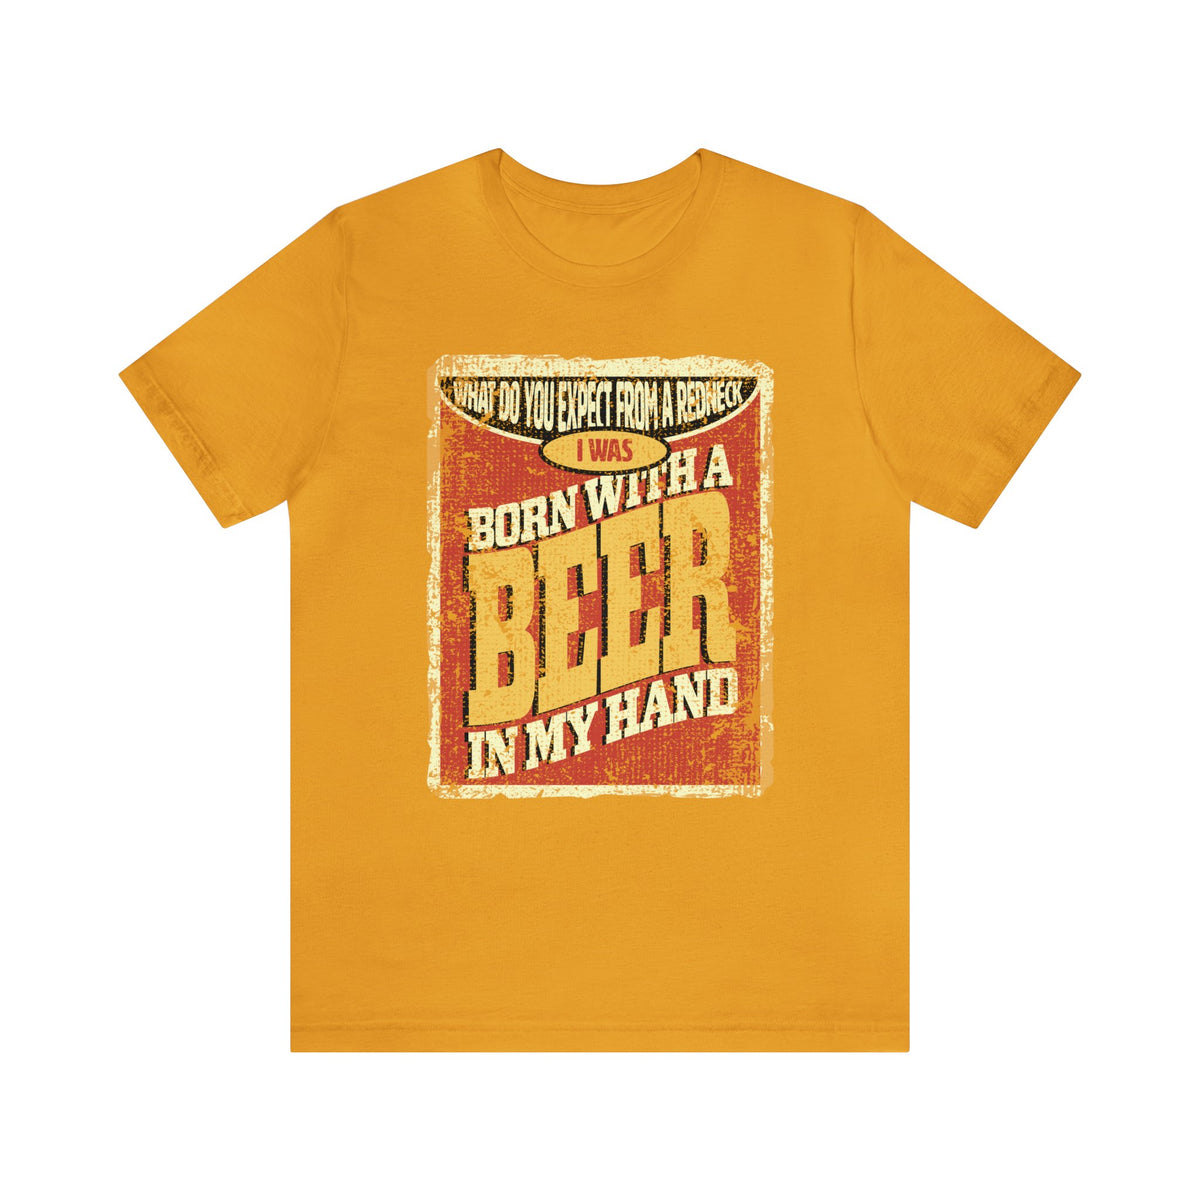 Born With a Beer Short Sleeve Graphic Tee | Country Music T-shirt | Redneck T-shirts